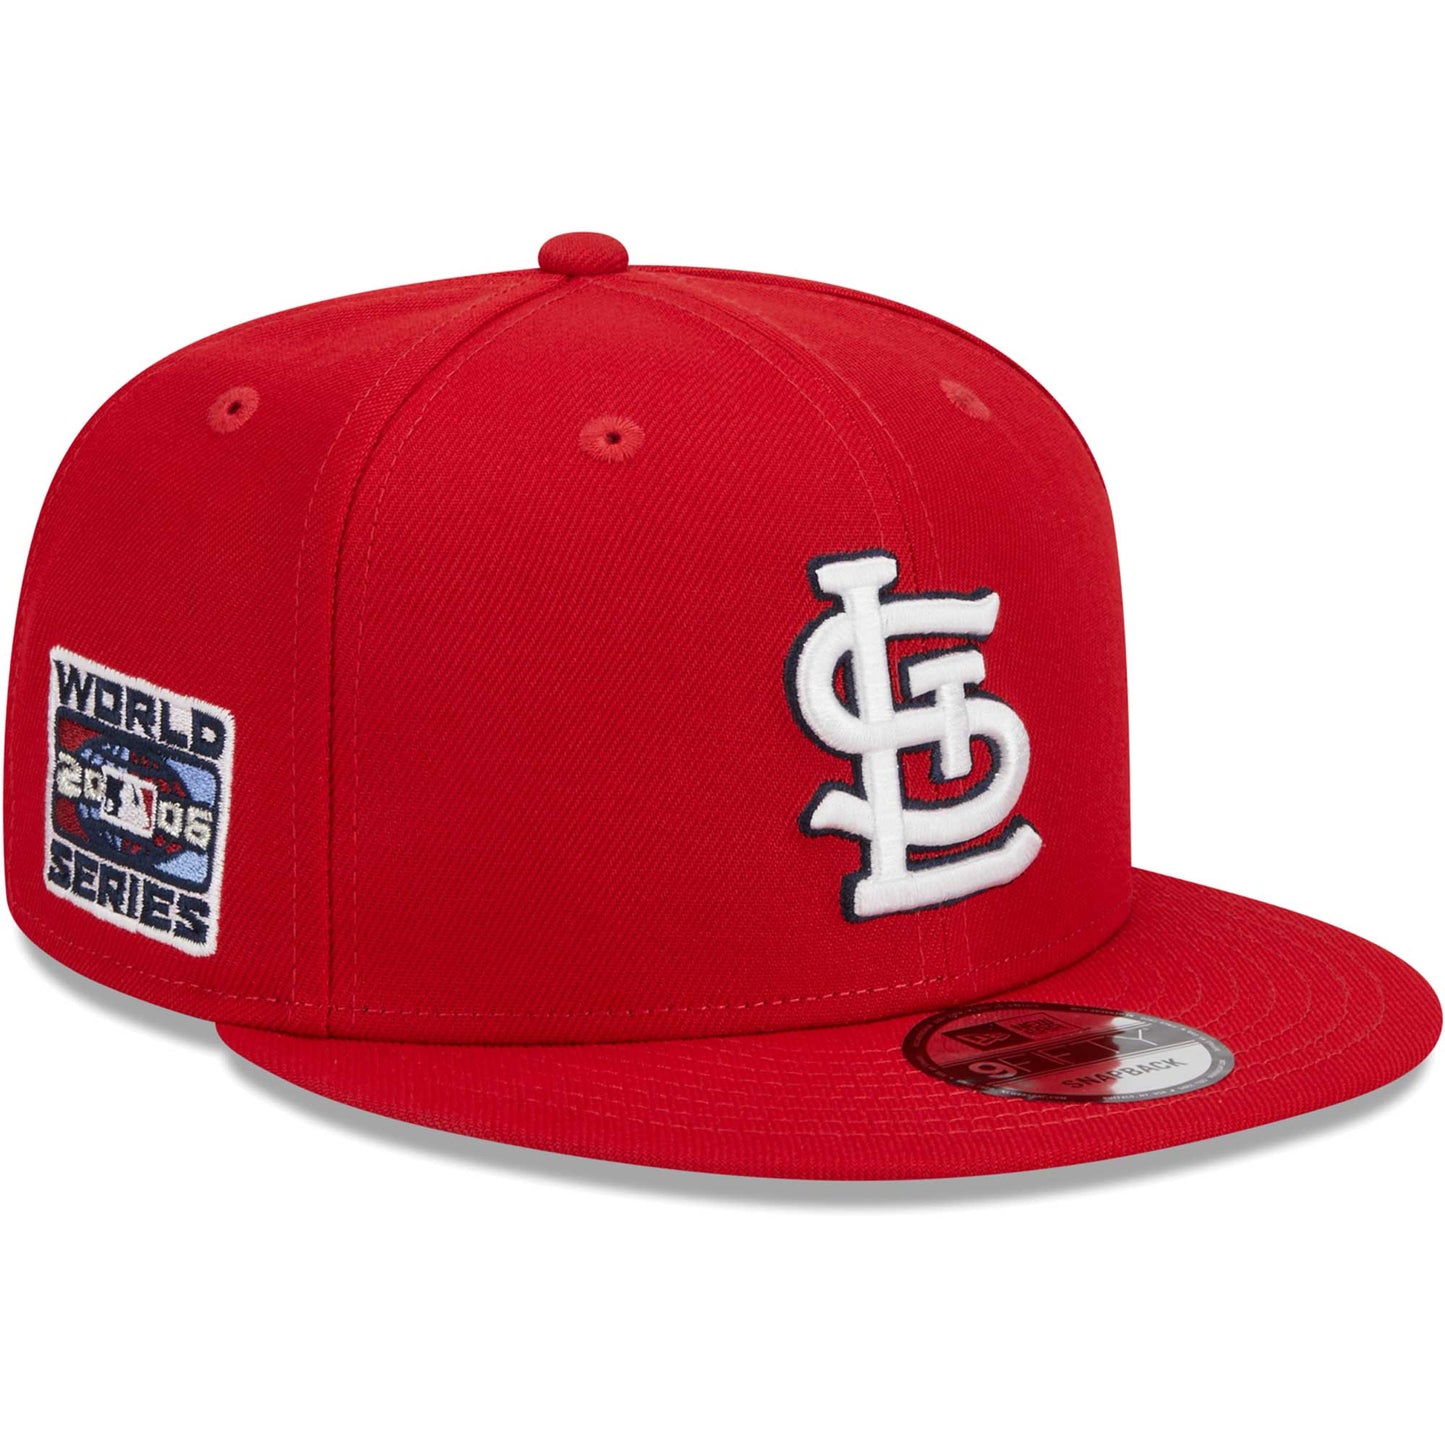 St. Louis Cardinals New Era 2006 World Series Side Patch 9FIFTY Snapback Hat - Red